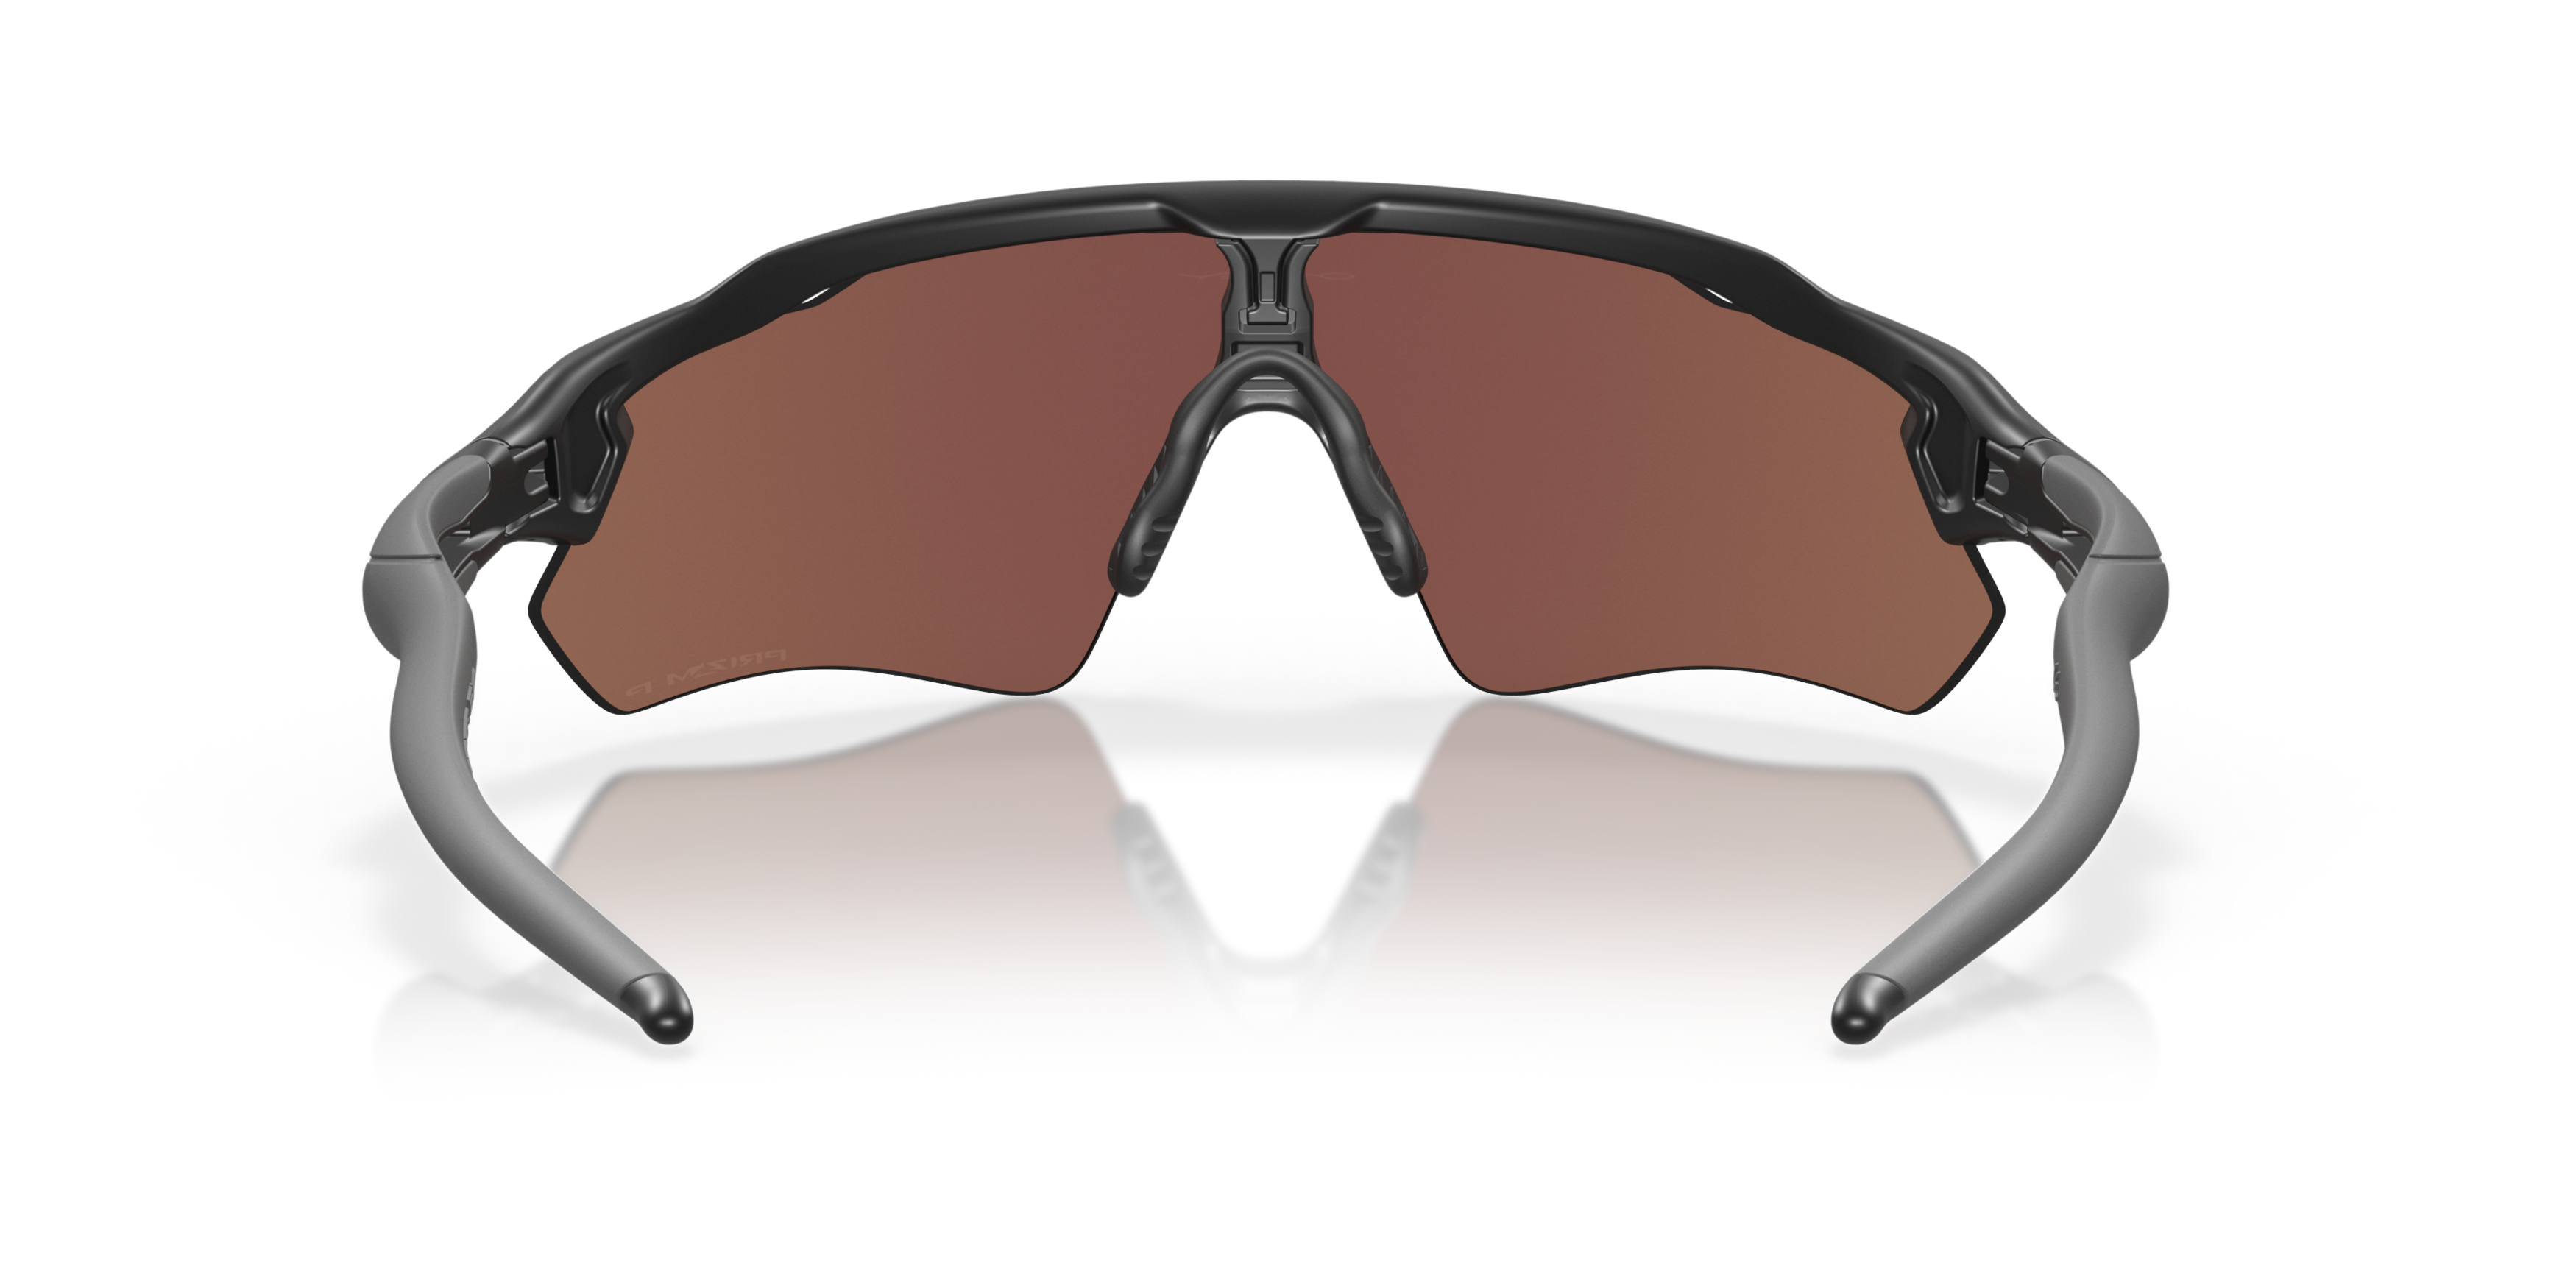 [products.image.detail02] Oakley Radar OO 9208 Sunglasses